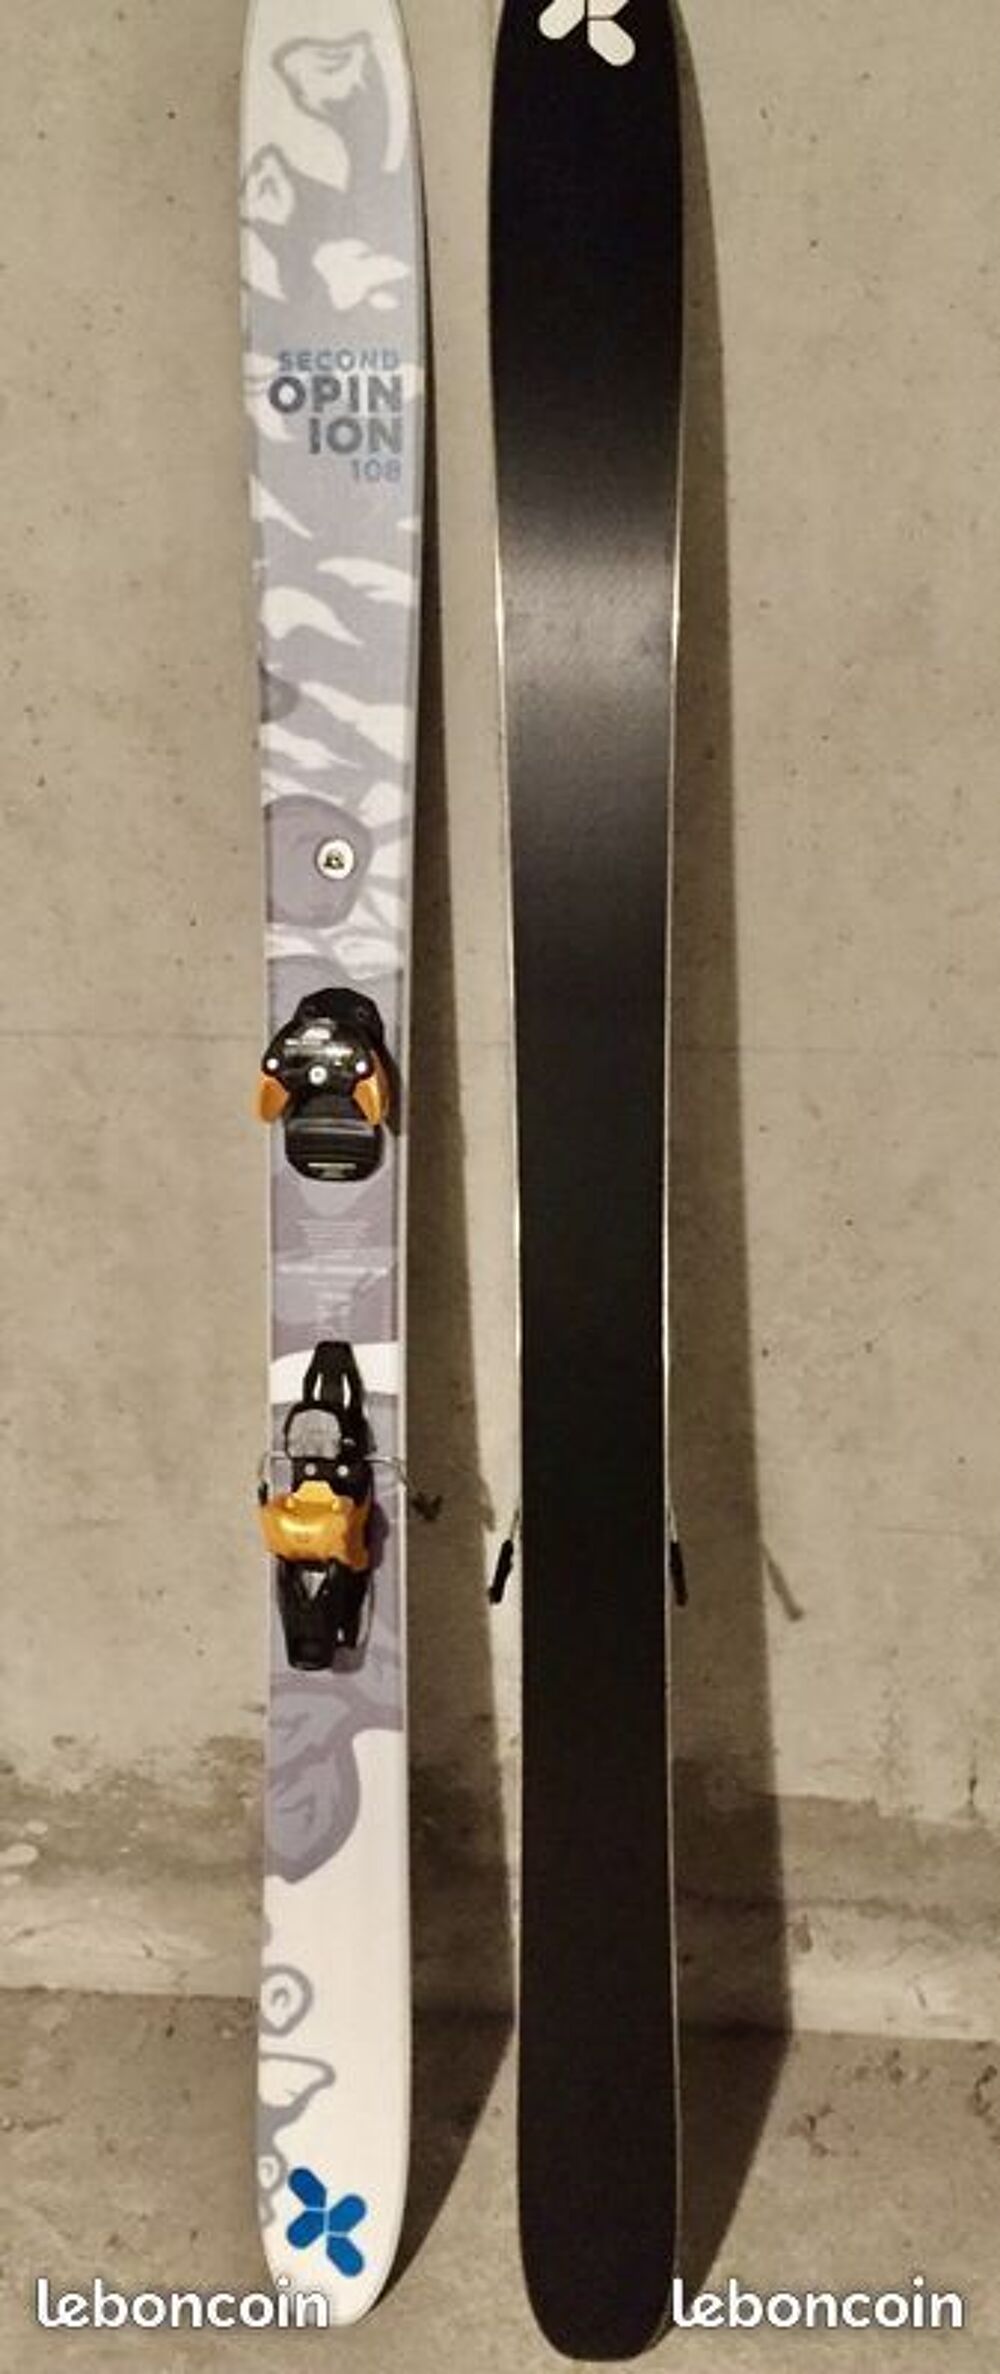 skis EXTREM second opinion 108 taille 179 avec fixations NEU Sports